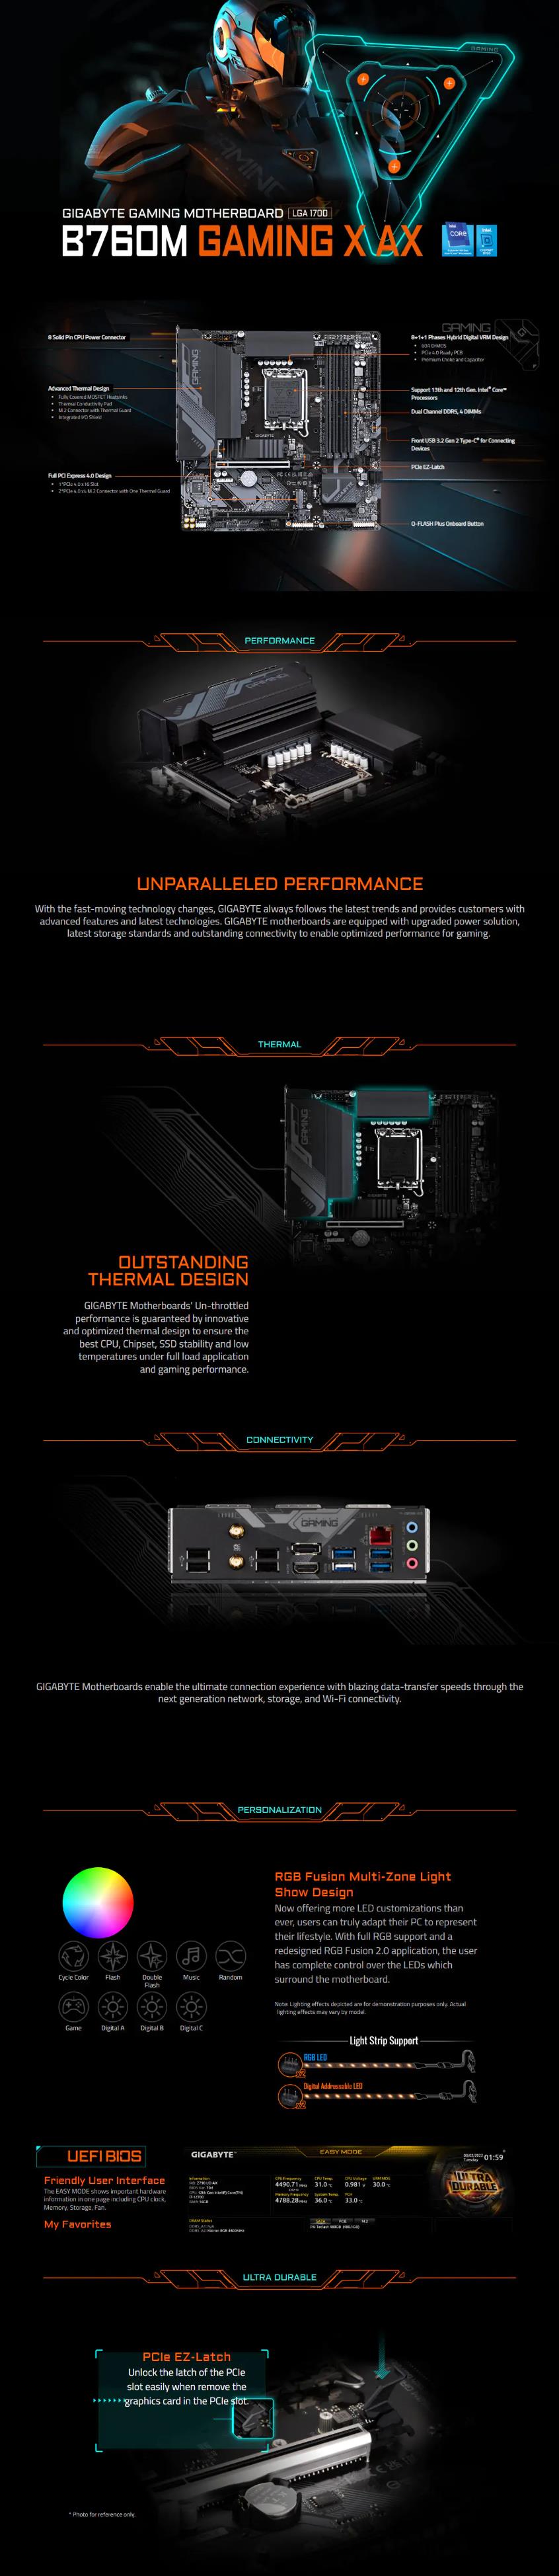 A large marketing image providing additional information about the product Gigabyte B760M Gaming X AX LGA1700 mATX Desktop Motherboard - Additional alt info not provided